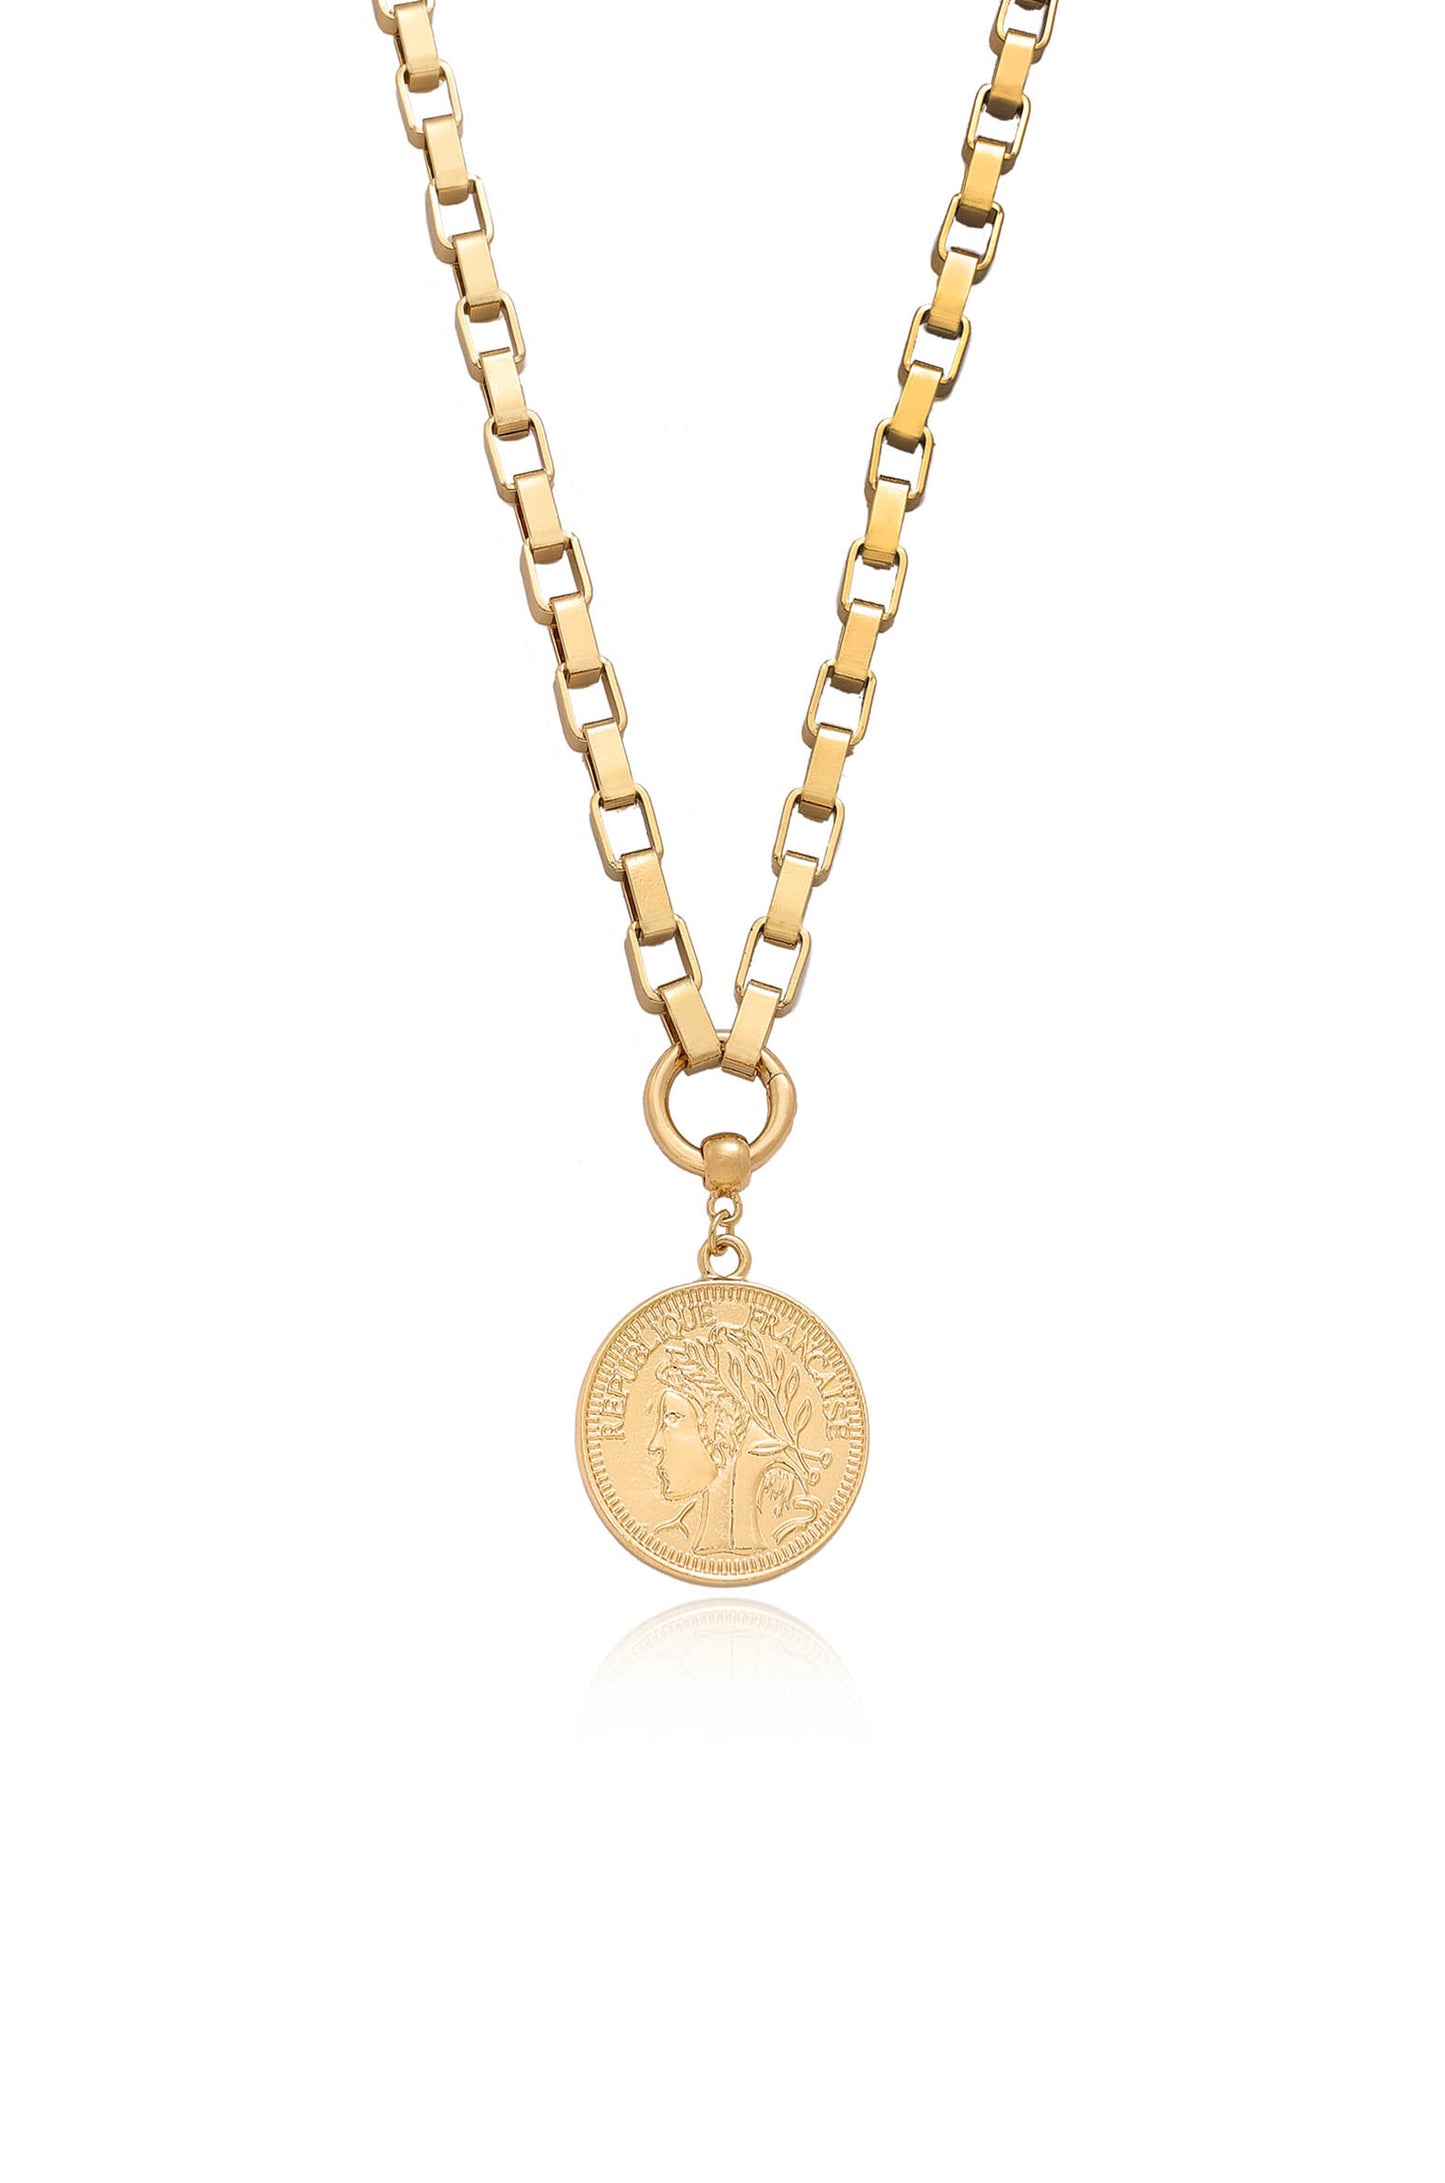 The Traveler's Coin 18k Gold Plated Chain Necklace close